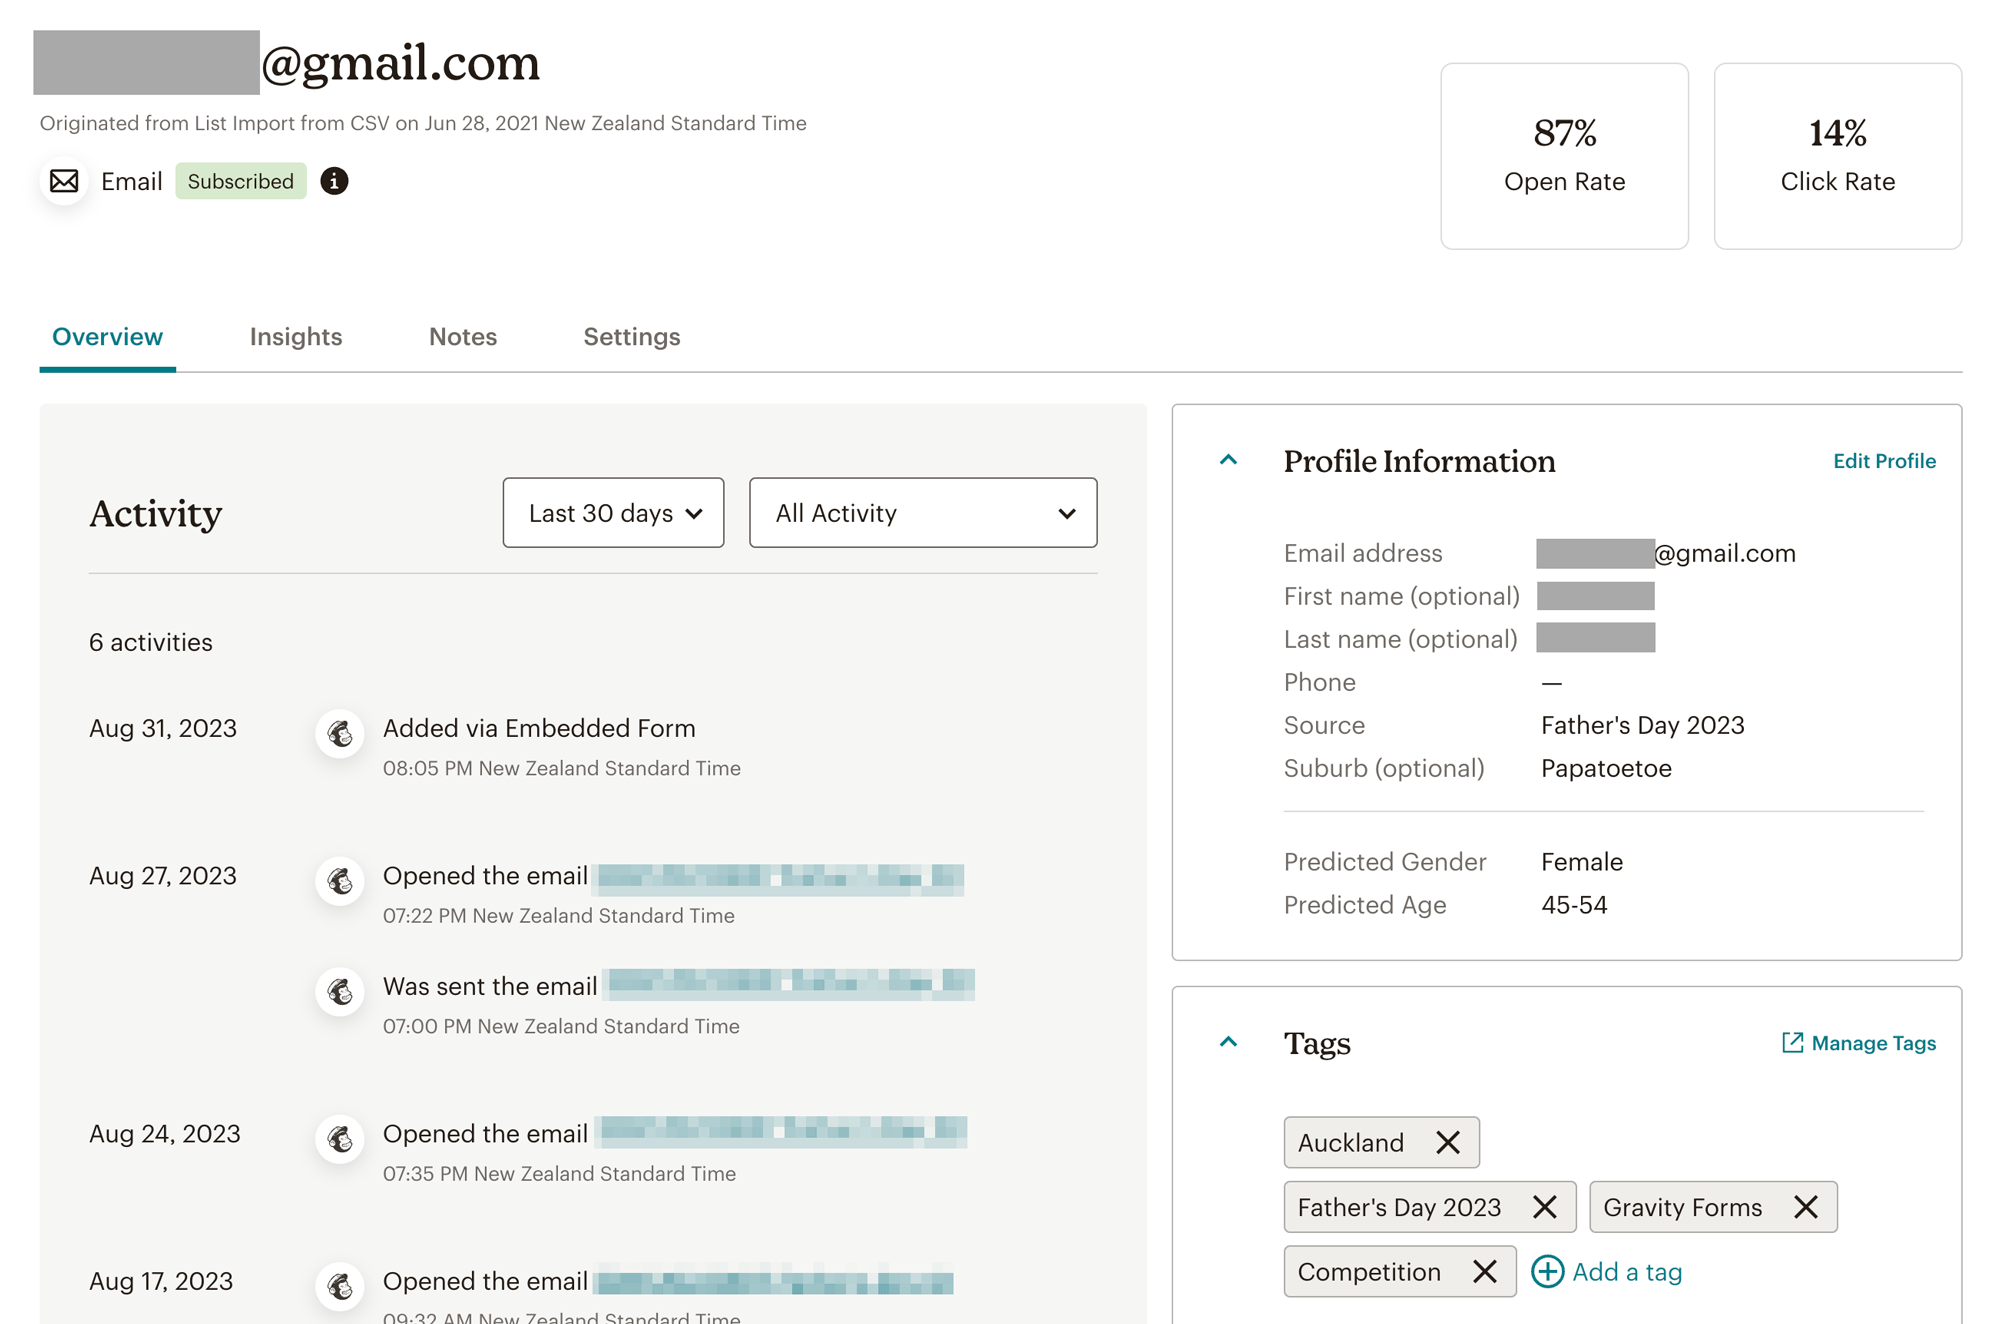 Screenshot of a recipient's profile in Mailchimp, showing several data attributes